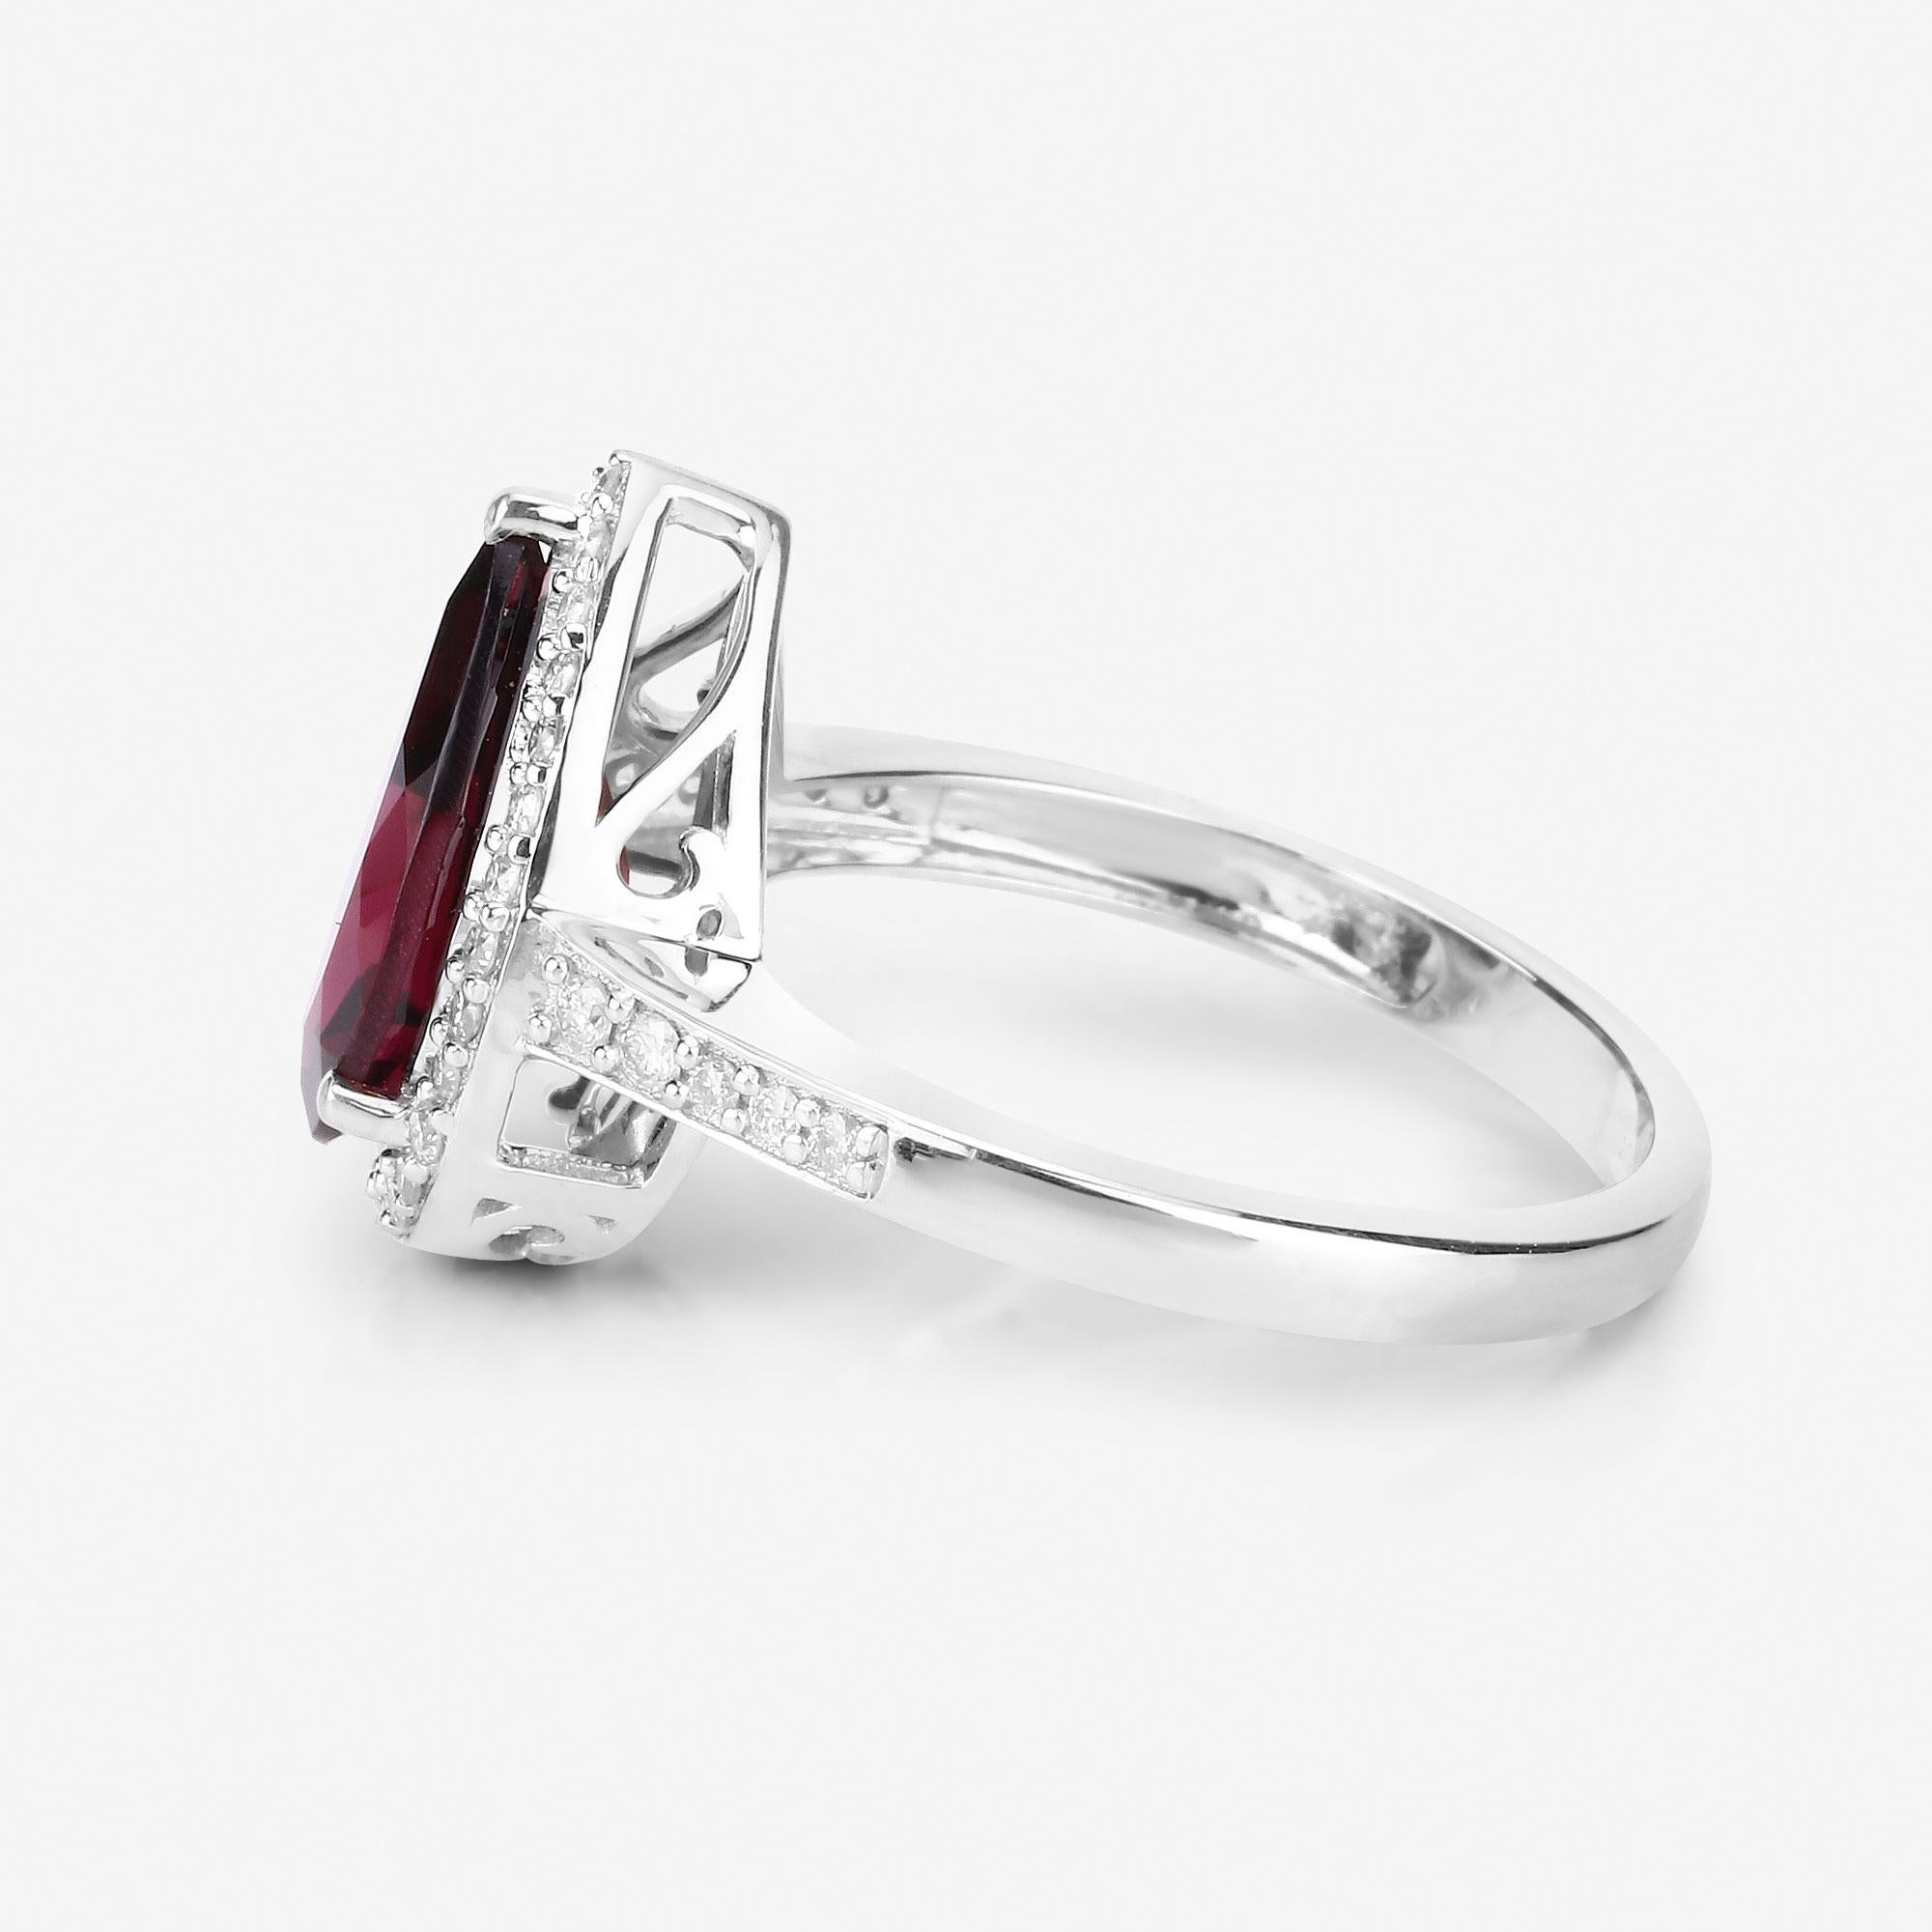 Rhodolite Garnet Cocktail Ring Diamond Setting 3.25 Carats 14K White Gold In Excellent Condition For Sale In Laguna Niguel, CA